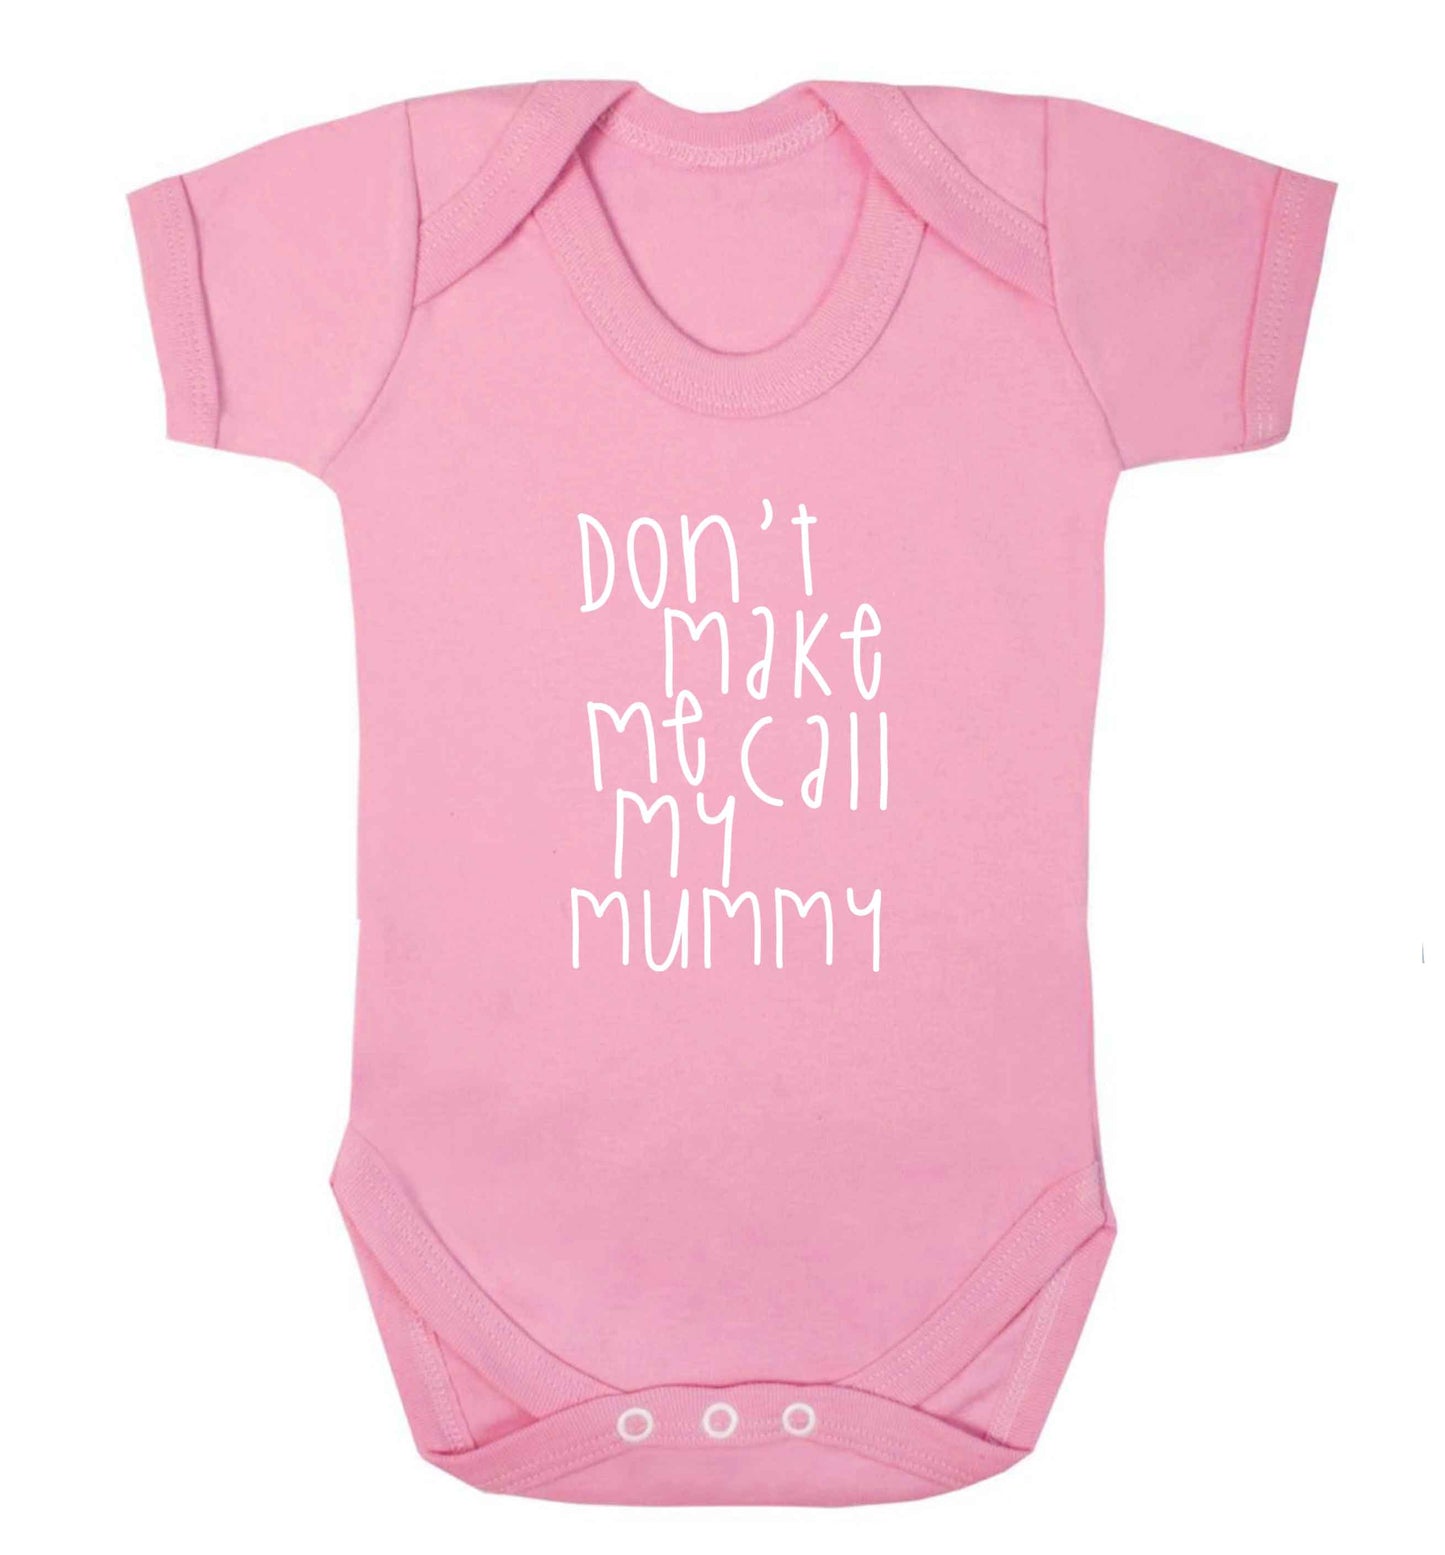 Don't make me call my mummy baby vest pale pink 18-24 months